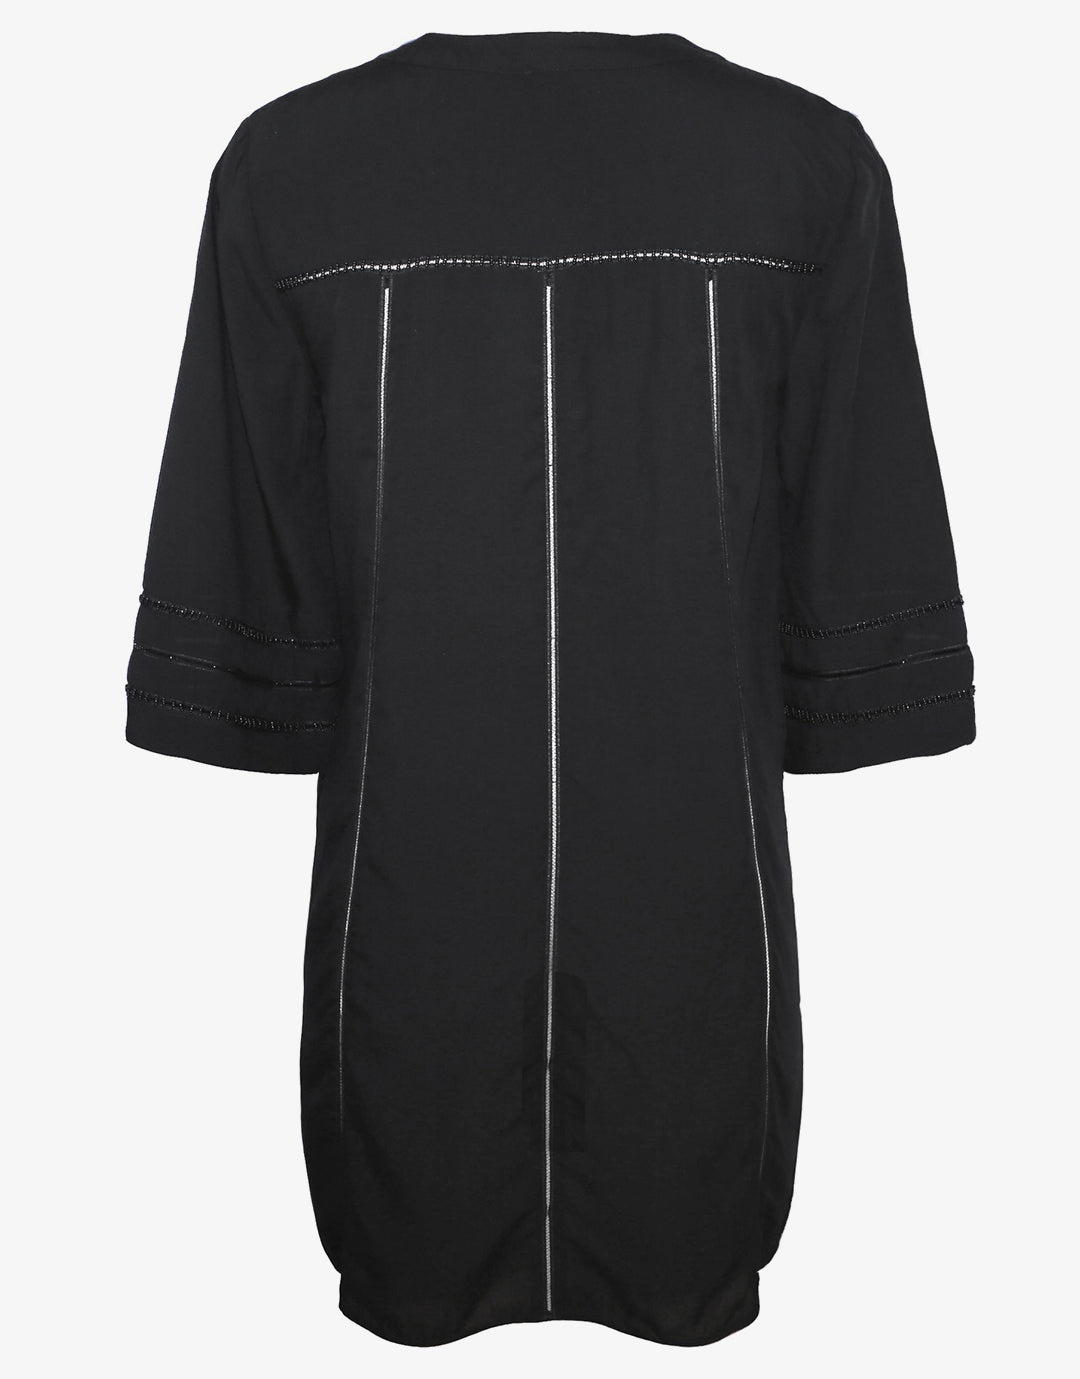 Ouverture Tunic - Black - Simply Beach UK